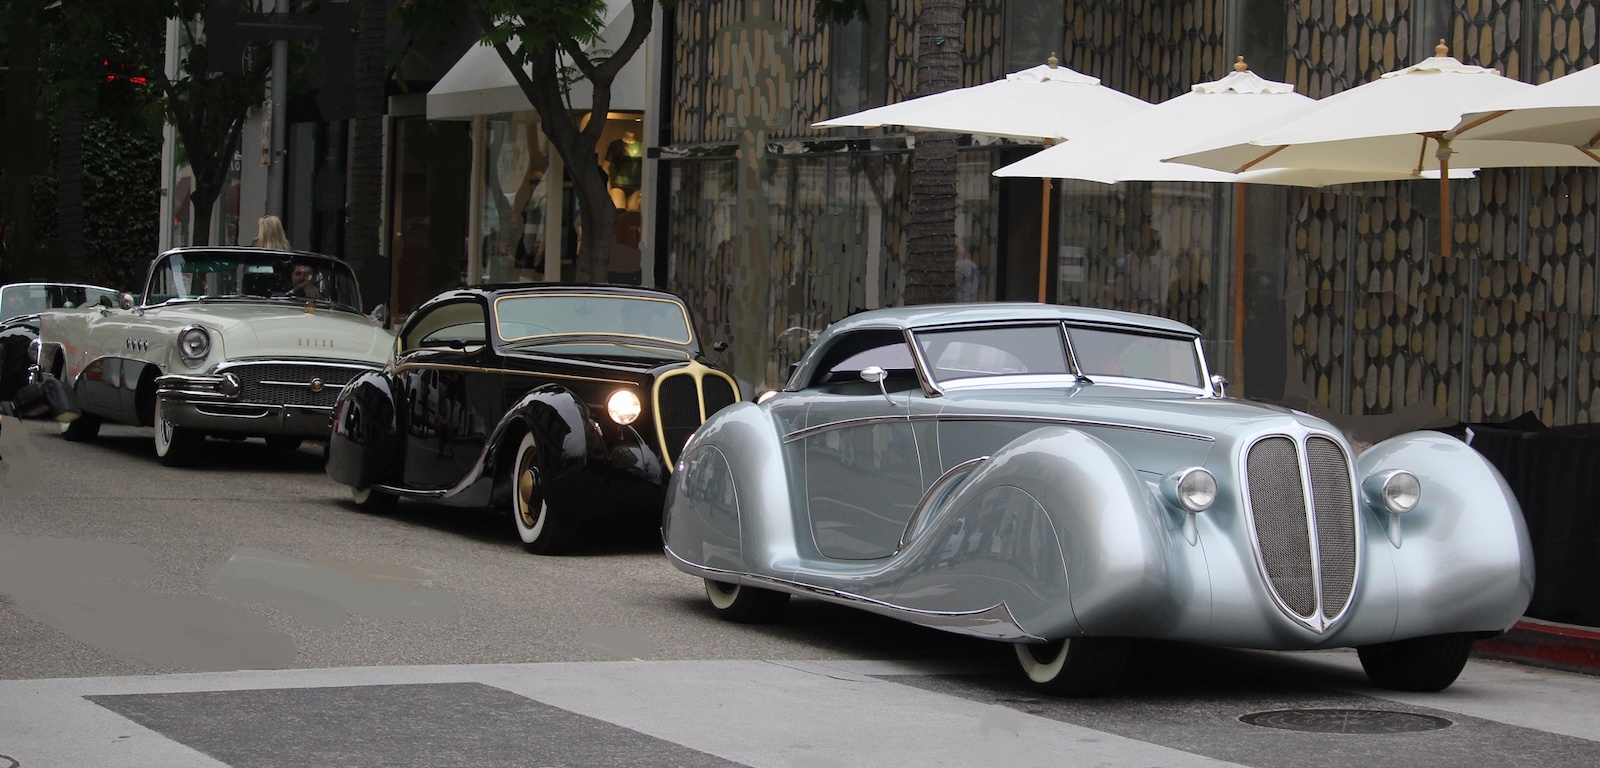 Upcoming Events, RODEO DRIVE CONCOURS D' ELEGANCE